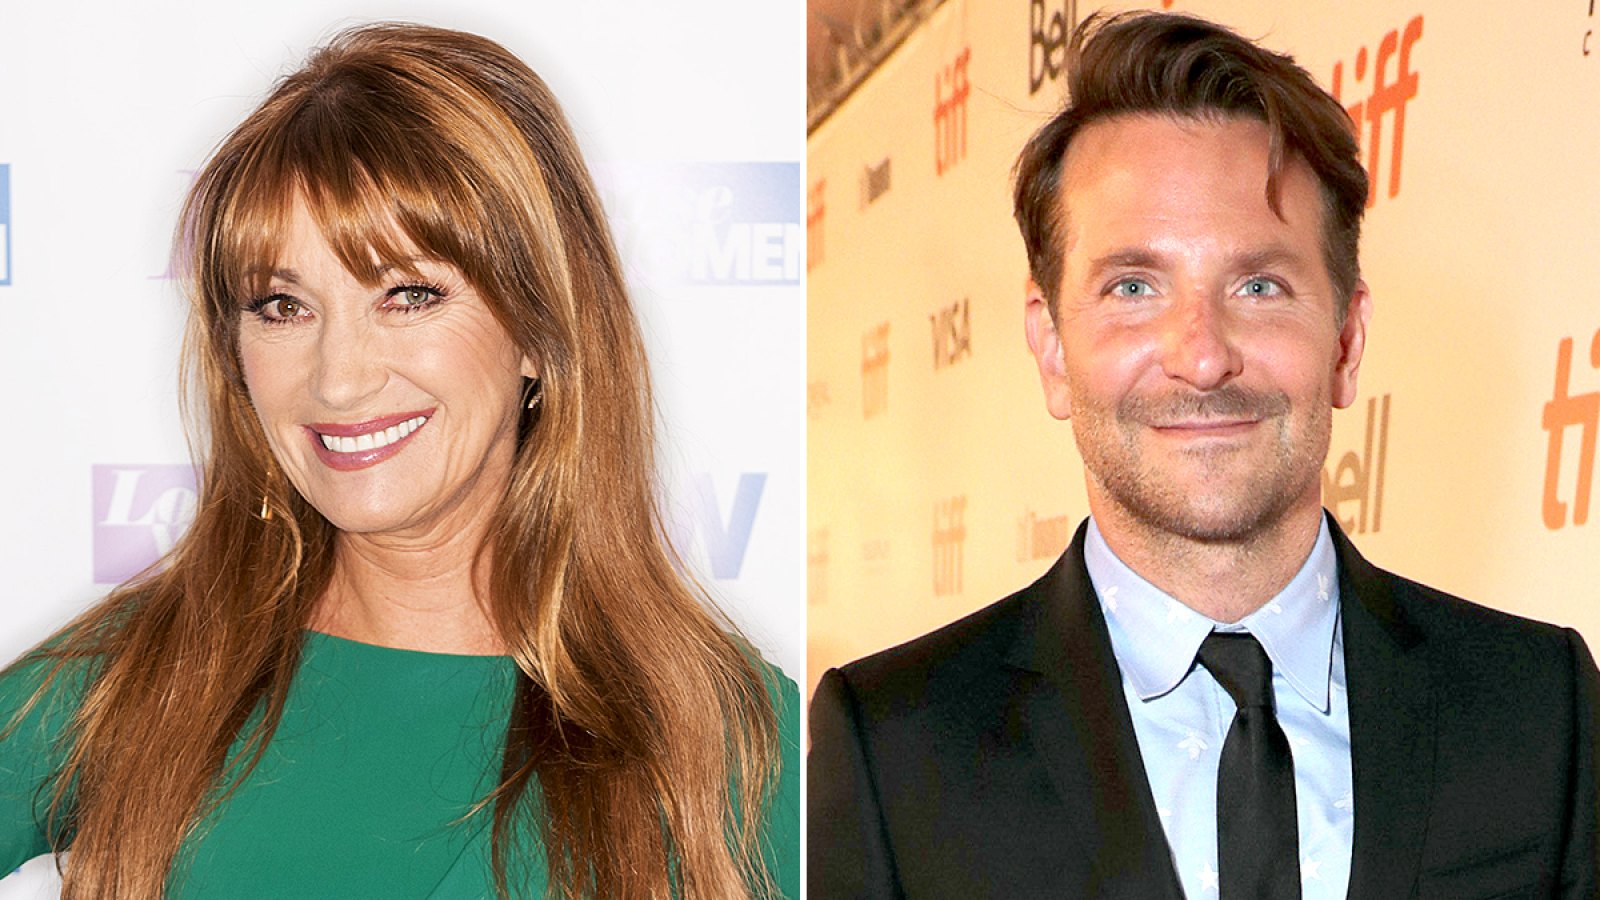 Jane-Seymour-Doesn’t-Think-Bradley-Cooper-‘Needs-Any-Setting-Up’